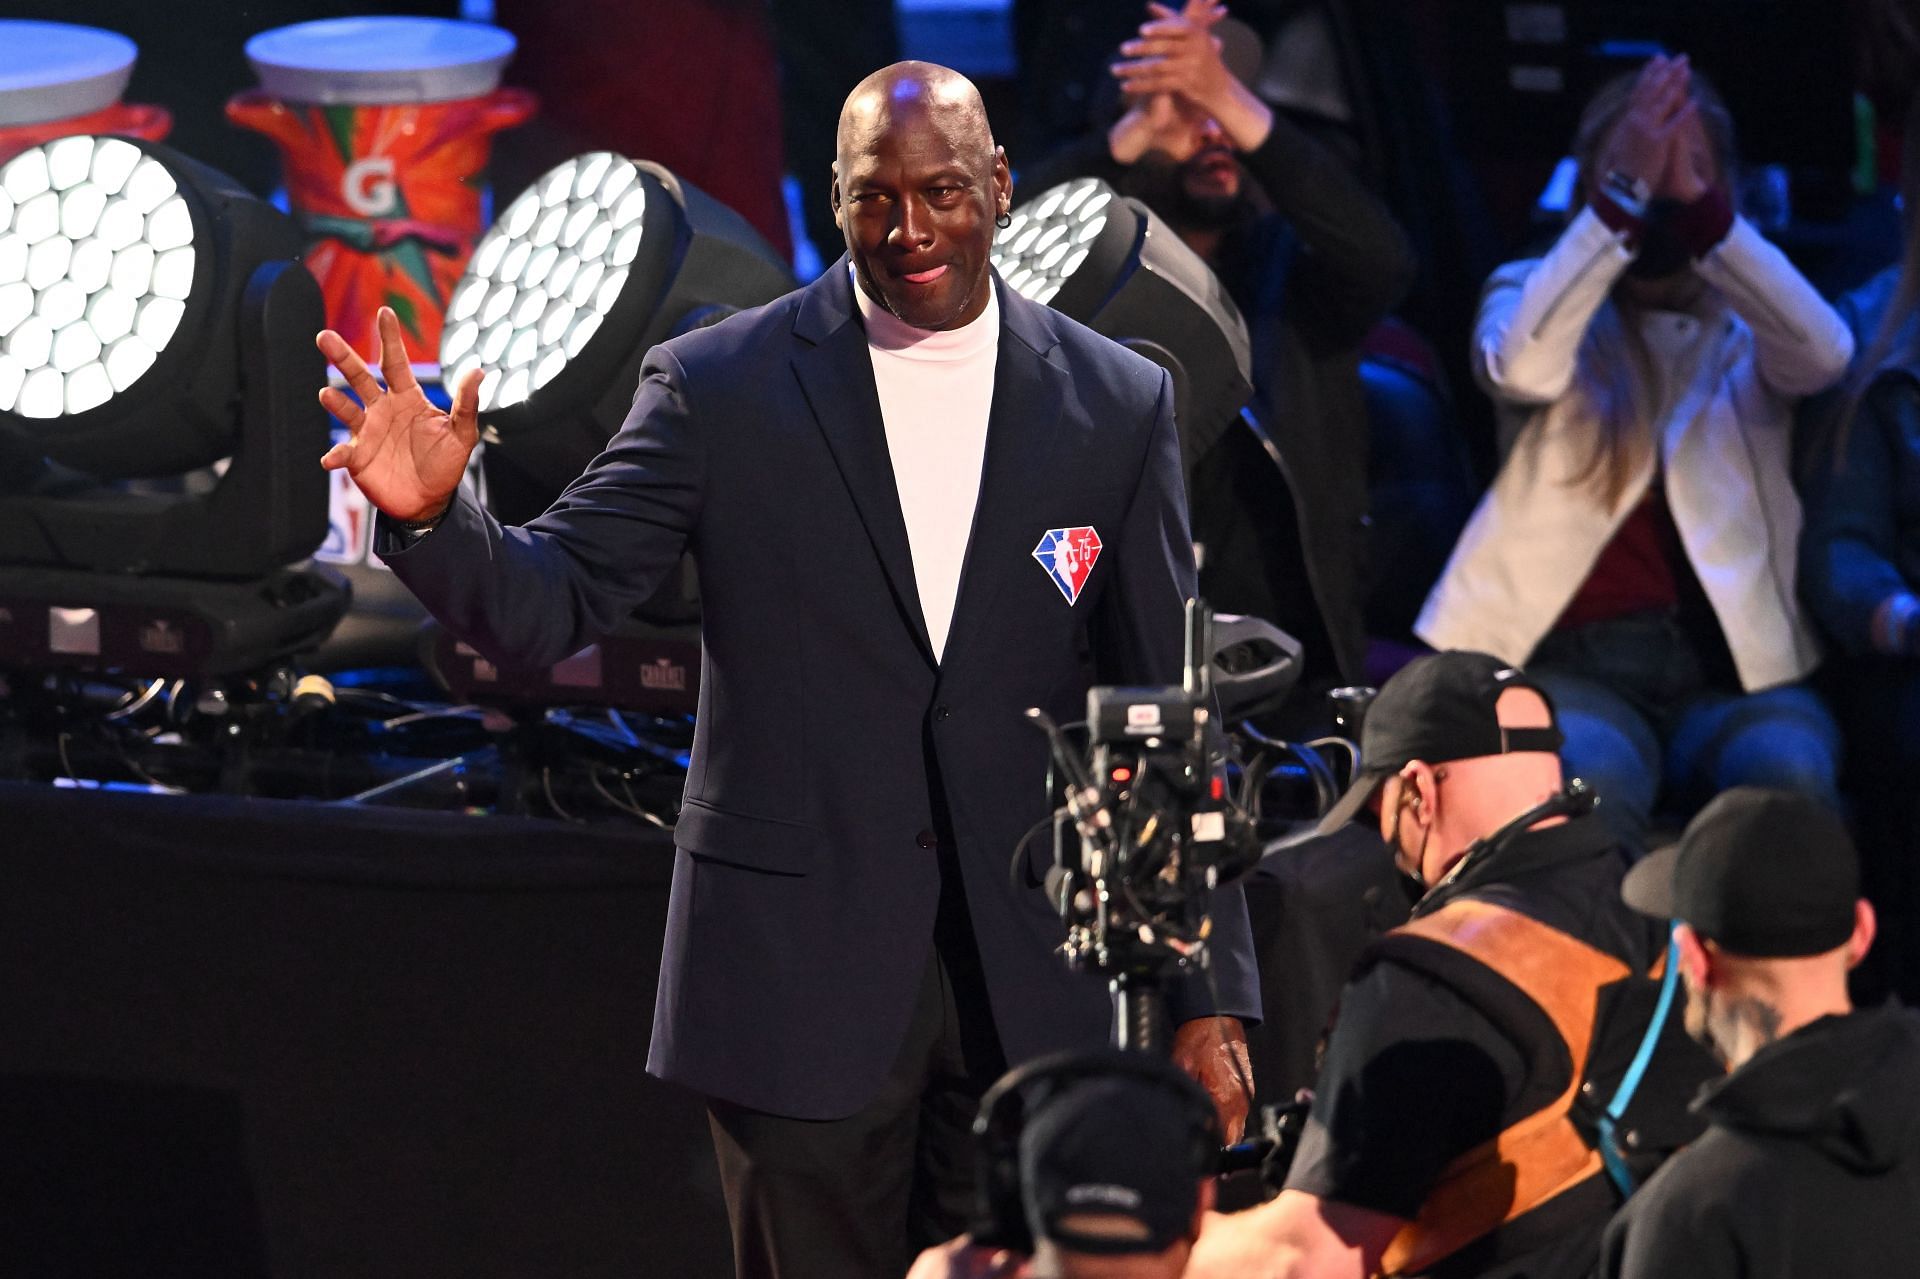 Michael Jordan reacts after being introduced as part of the NBA 75th Anniversary Team.